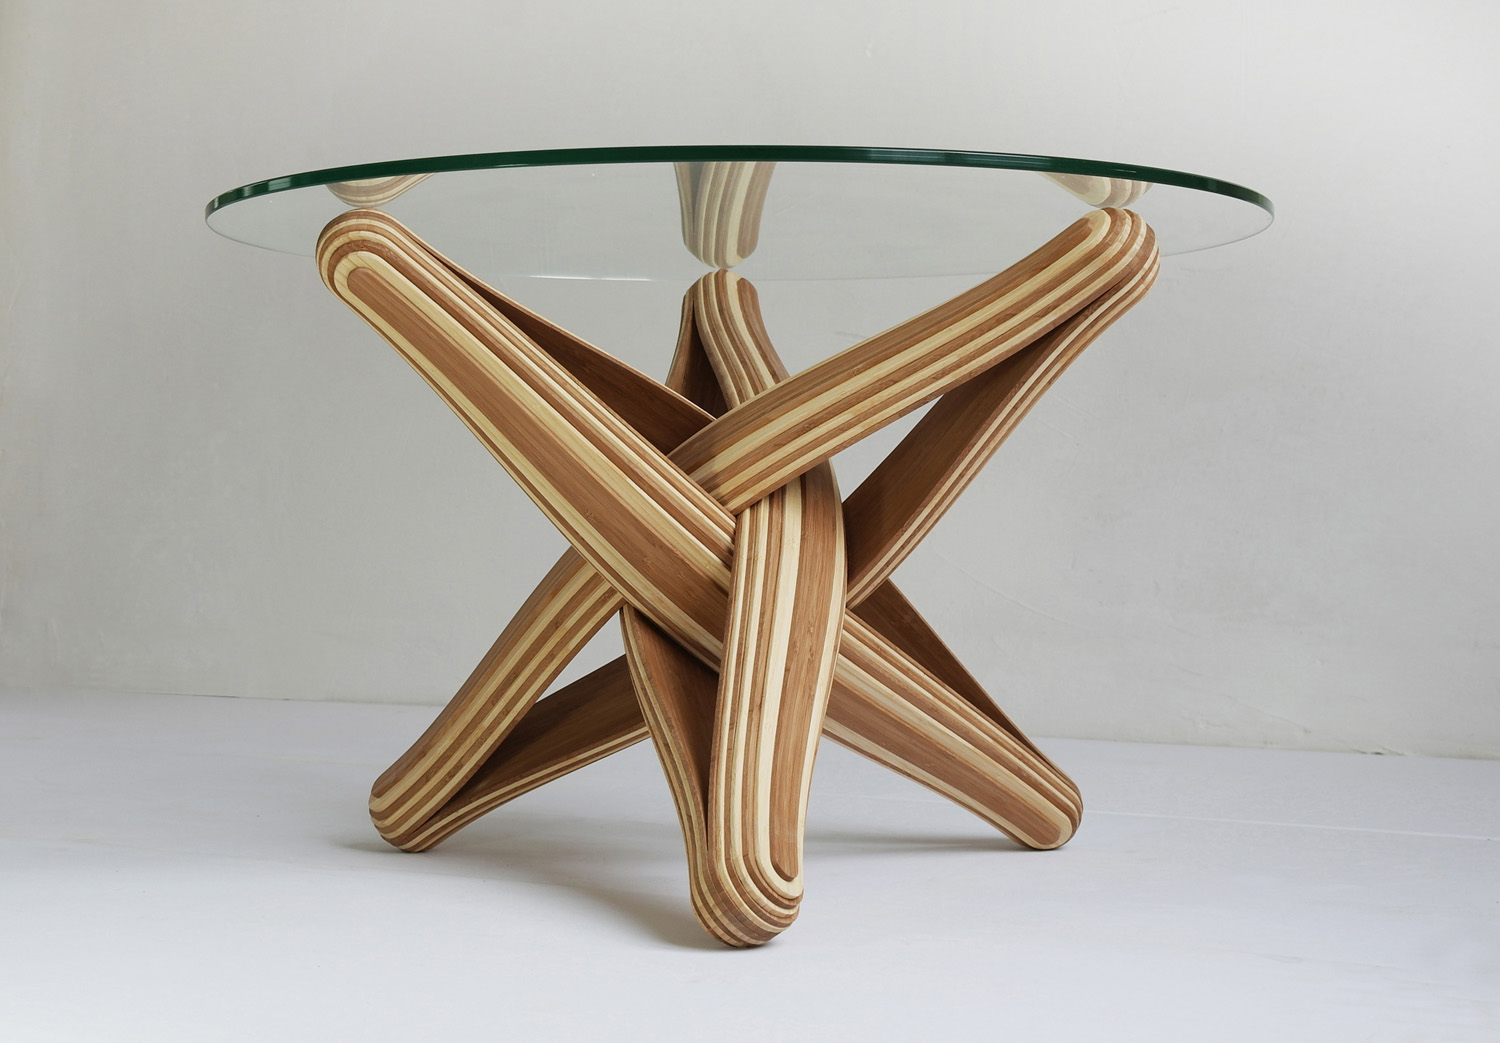 sustainable furniture lock is a bending, twisting coffee table made out of layered, TZCFDSX